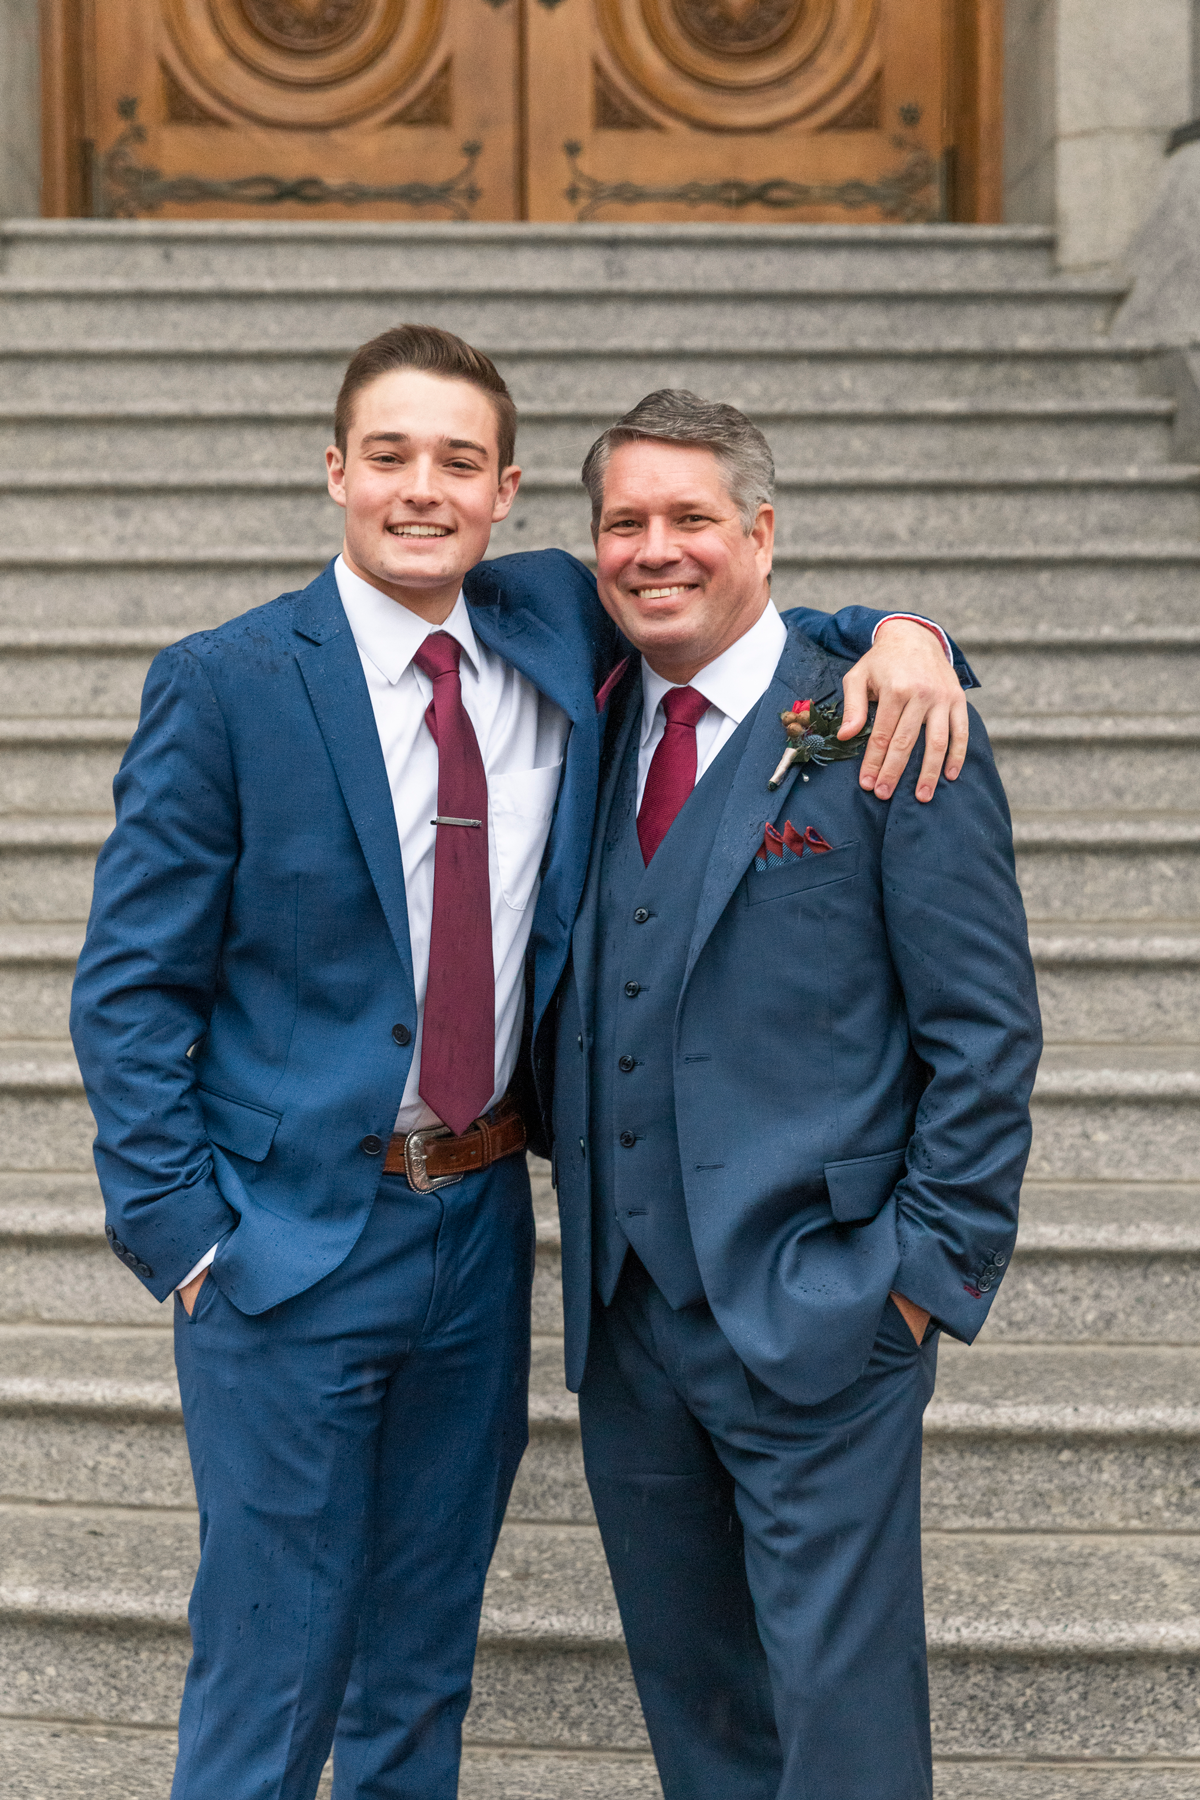  father son wedding photos navy wedding suits cranberry red wedding tie red boutonniere staircase salt lake city lds temple rainy wedding day happy hugging professional salt lake city wedding photographer #saltlakeldstemple #saltlakecityutah #temples